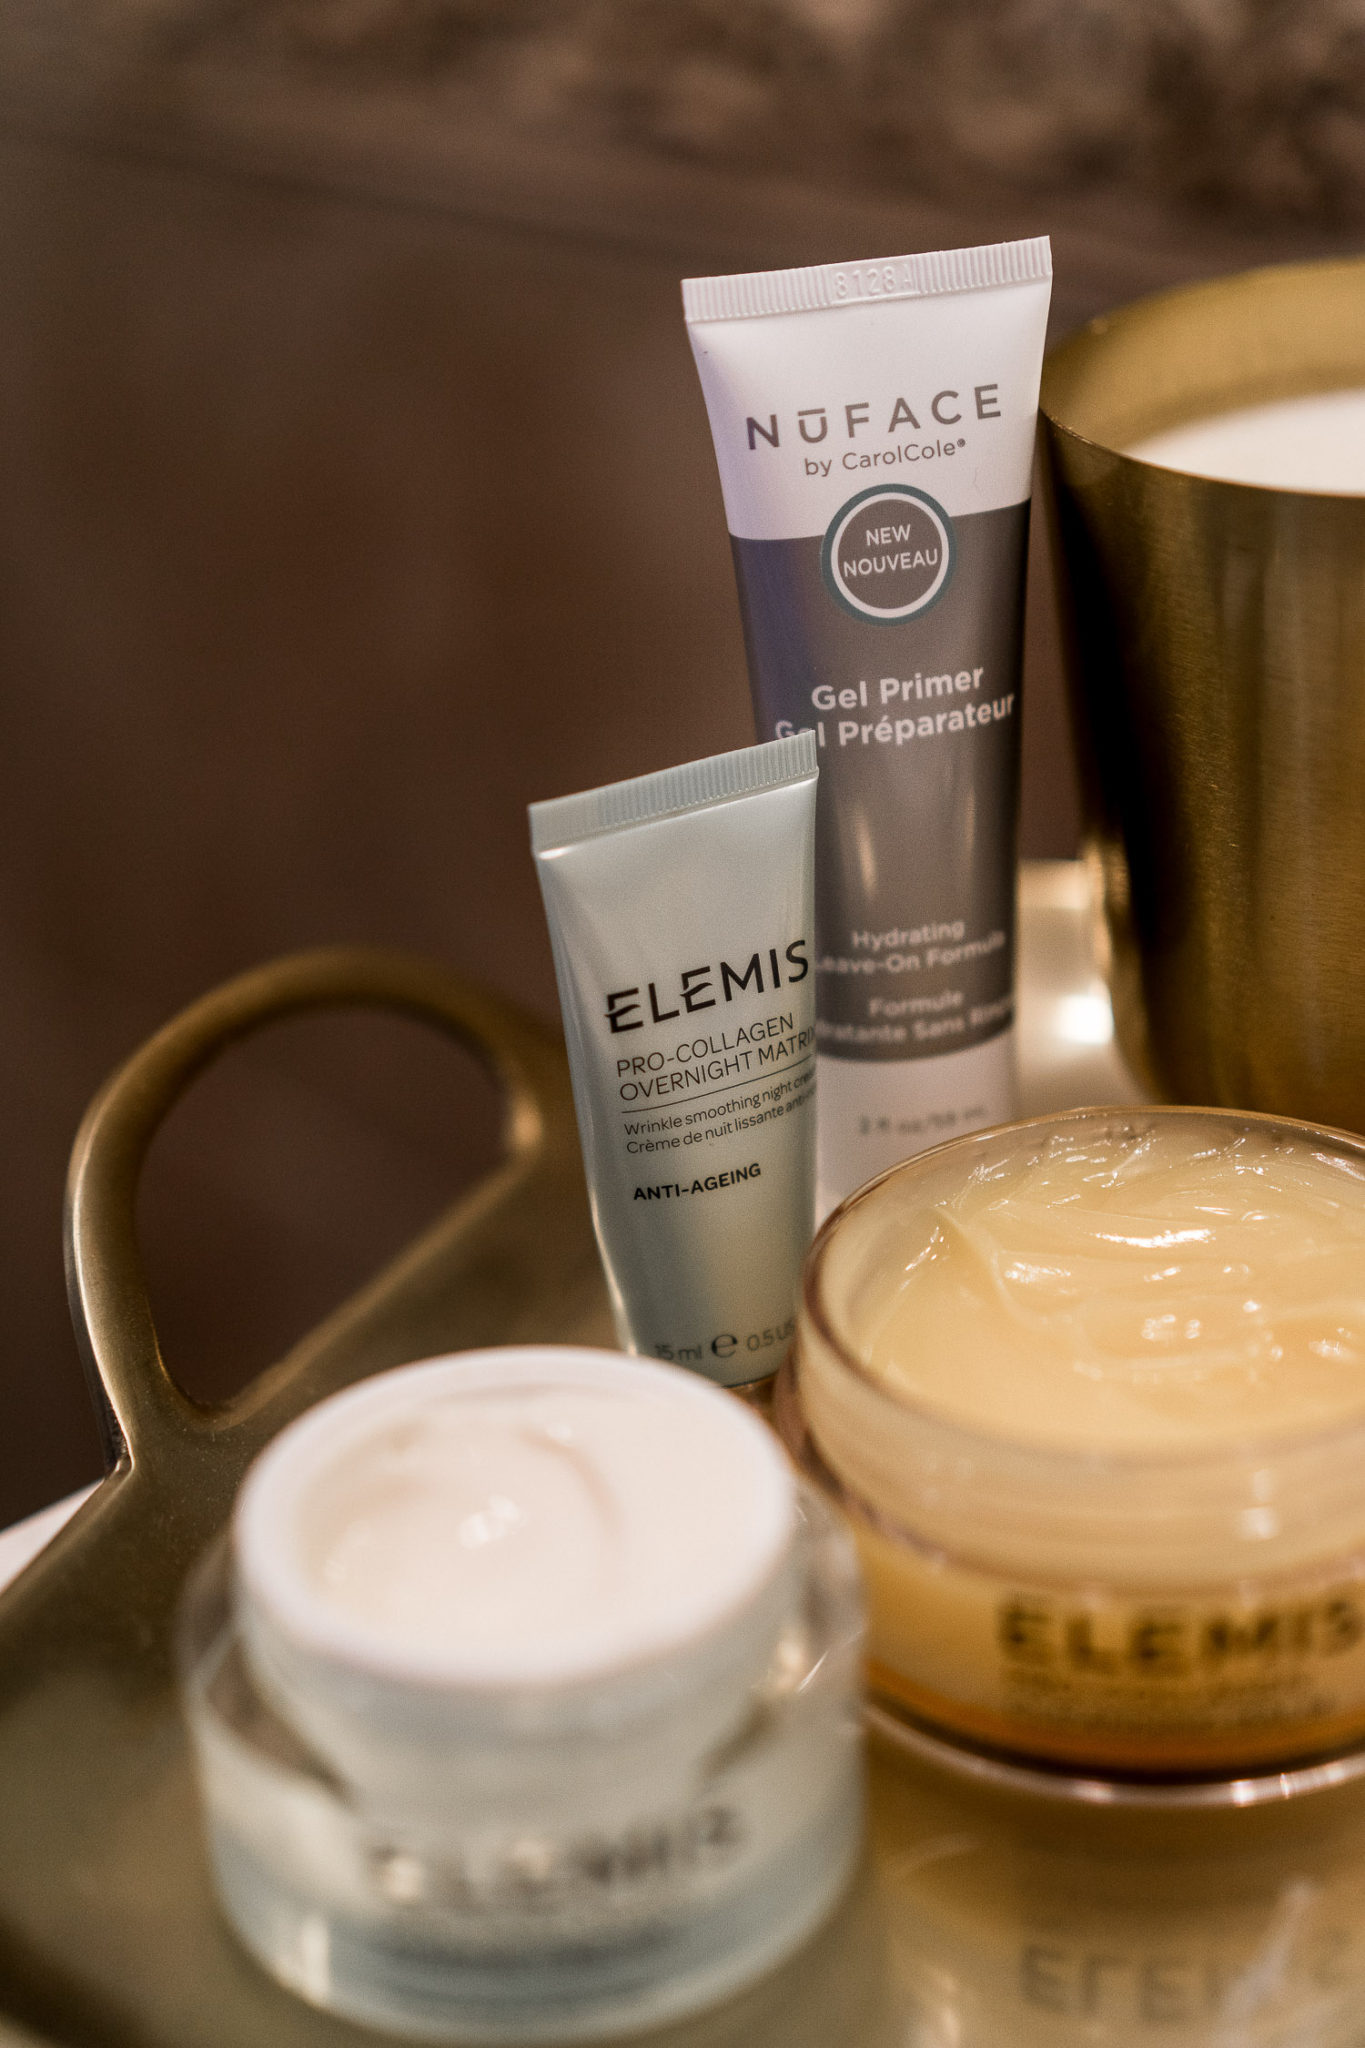 elemis and nuface products